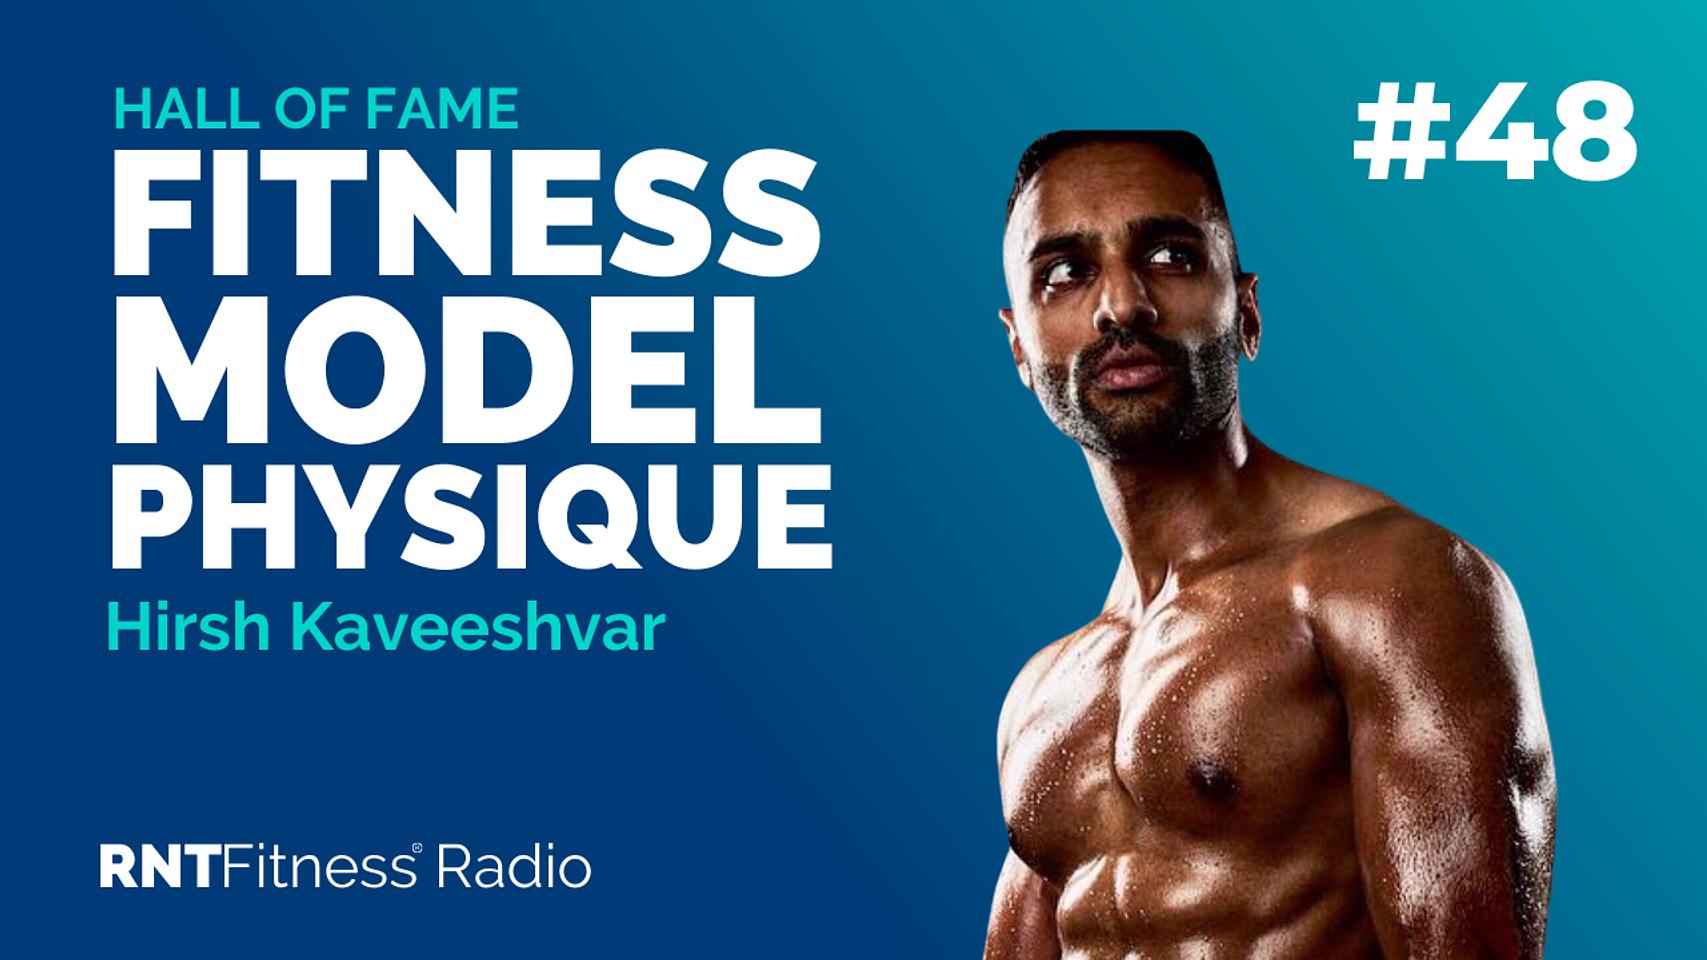 Ep. 48 - Hall of Fame | Hirsh Kaveeshvar: How He Achieved A Fitness Model Physique as A Busy Physician